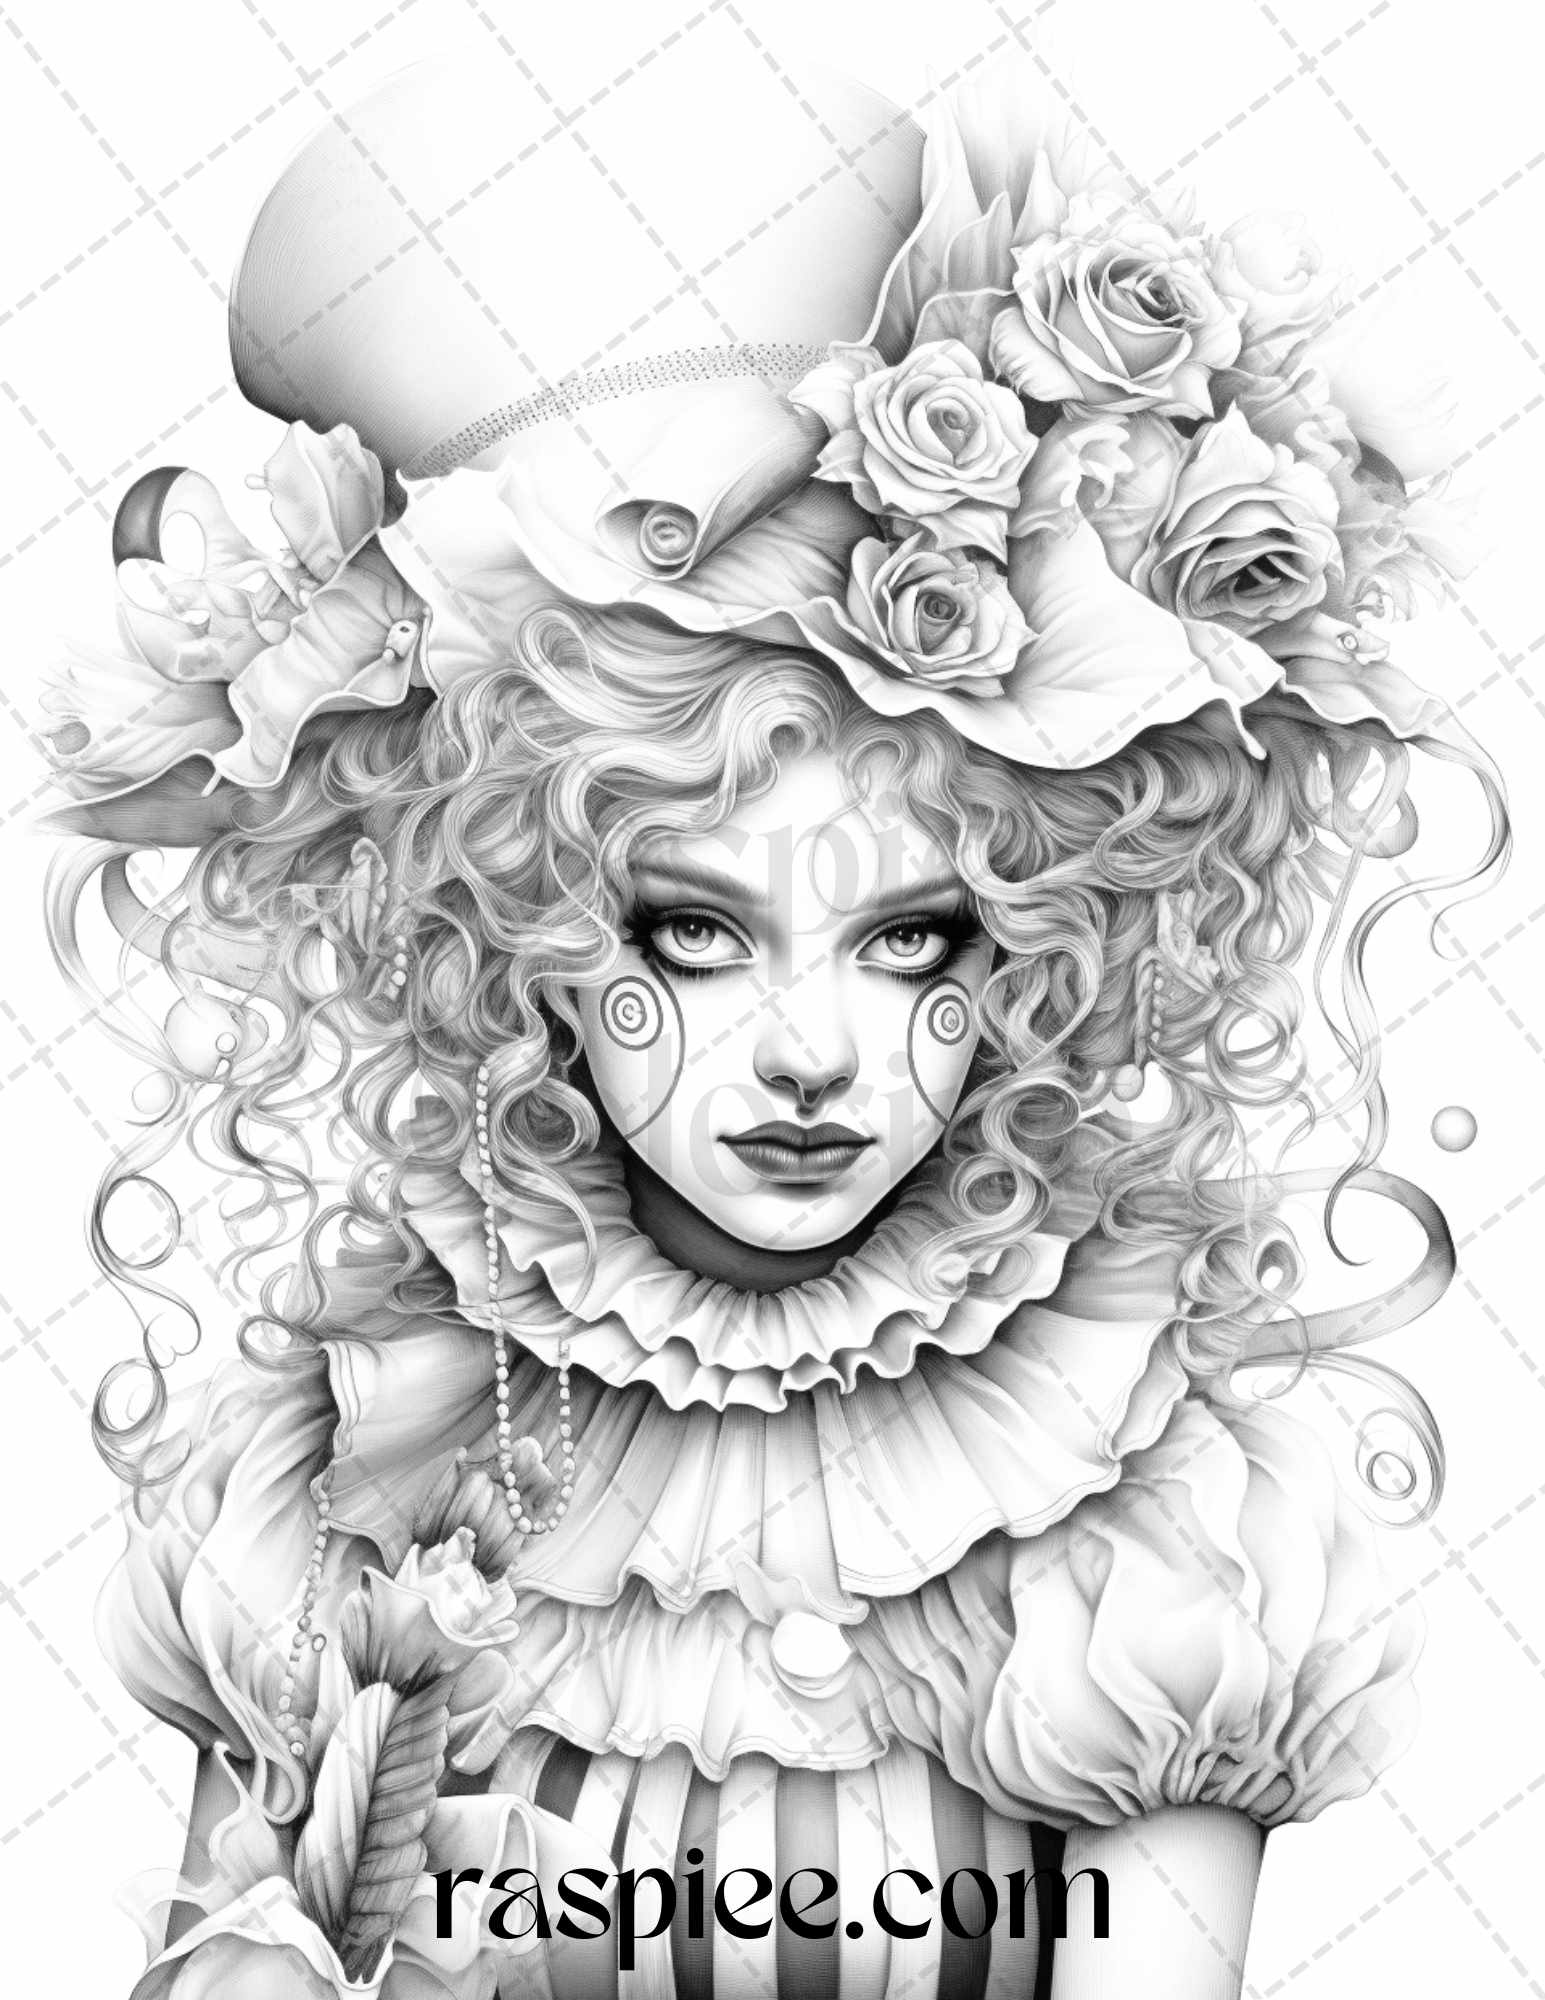 Clown Girls Grayscale Coloring Pages for Adults, Printable Clown Girls Coloring Book, High-Quality Grayscale Printable Art, Adult Coloring Book Instant Download, DIY Grayscale Coloring for Stress Relief, Portrait Coloring Pages for Adults, Portrait Grayscale Coloring Pages